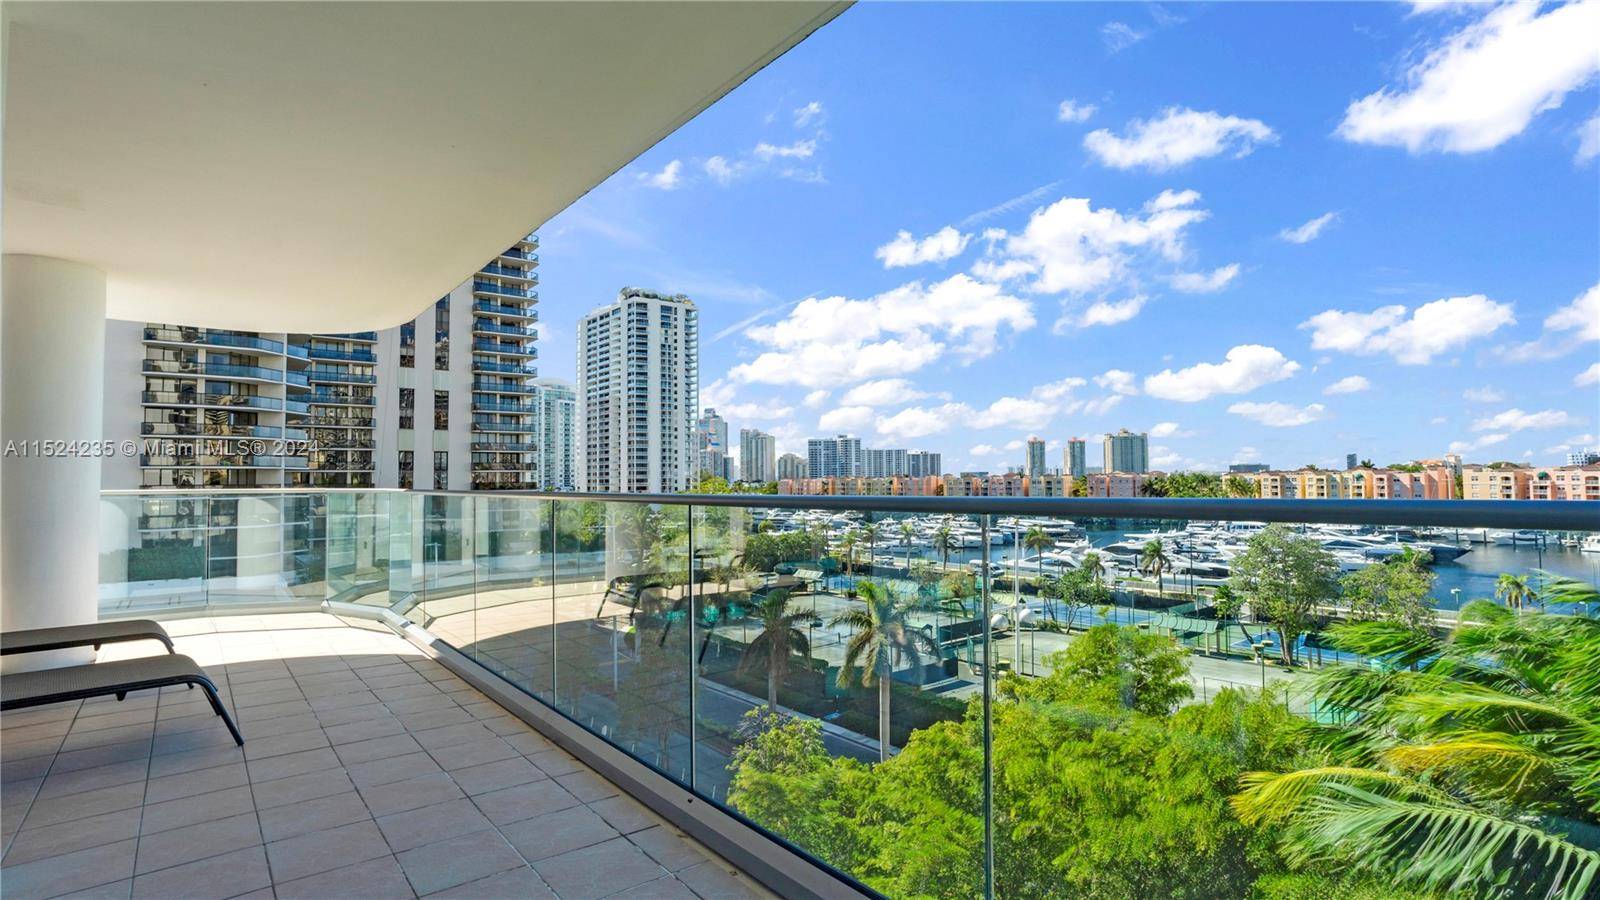 This beautiful corner unit stands as the epitome of value within Turnberry's esteemed domain.